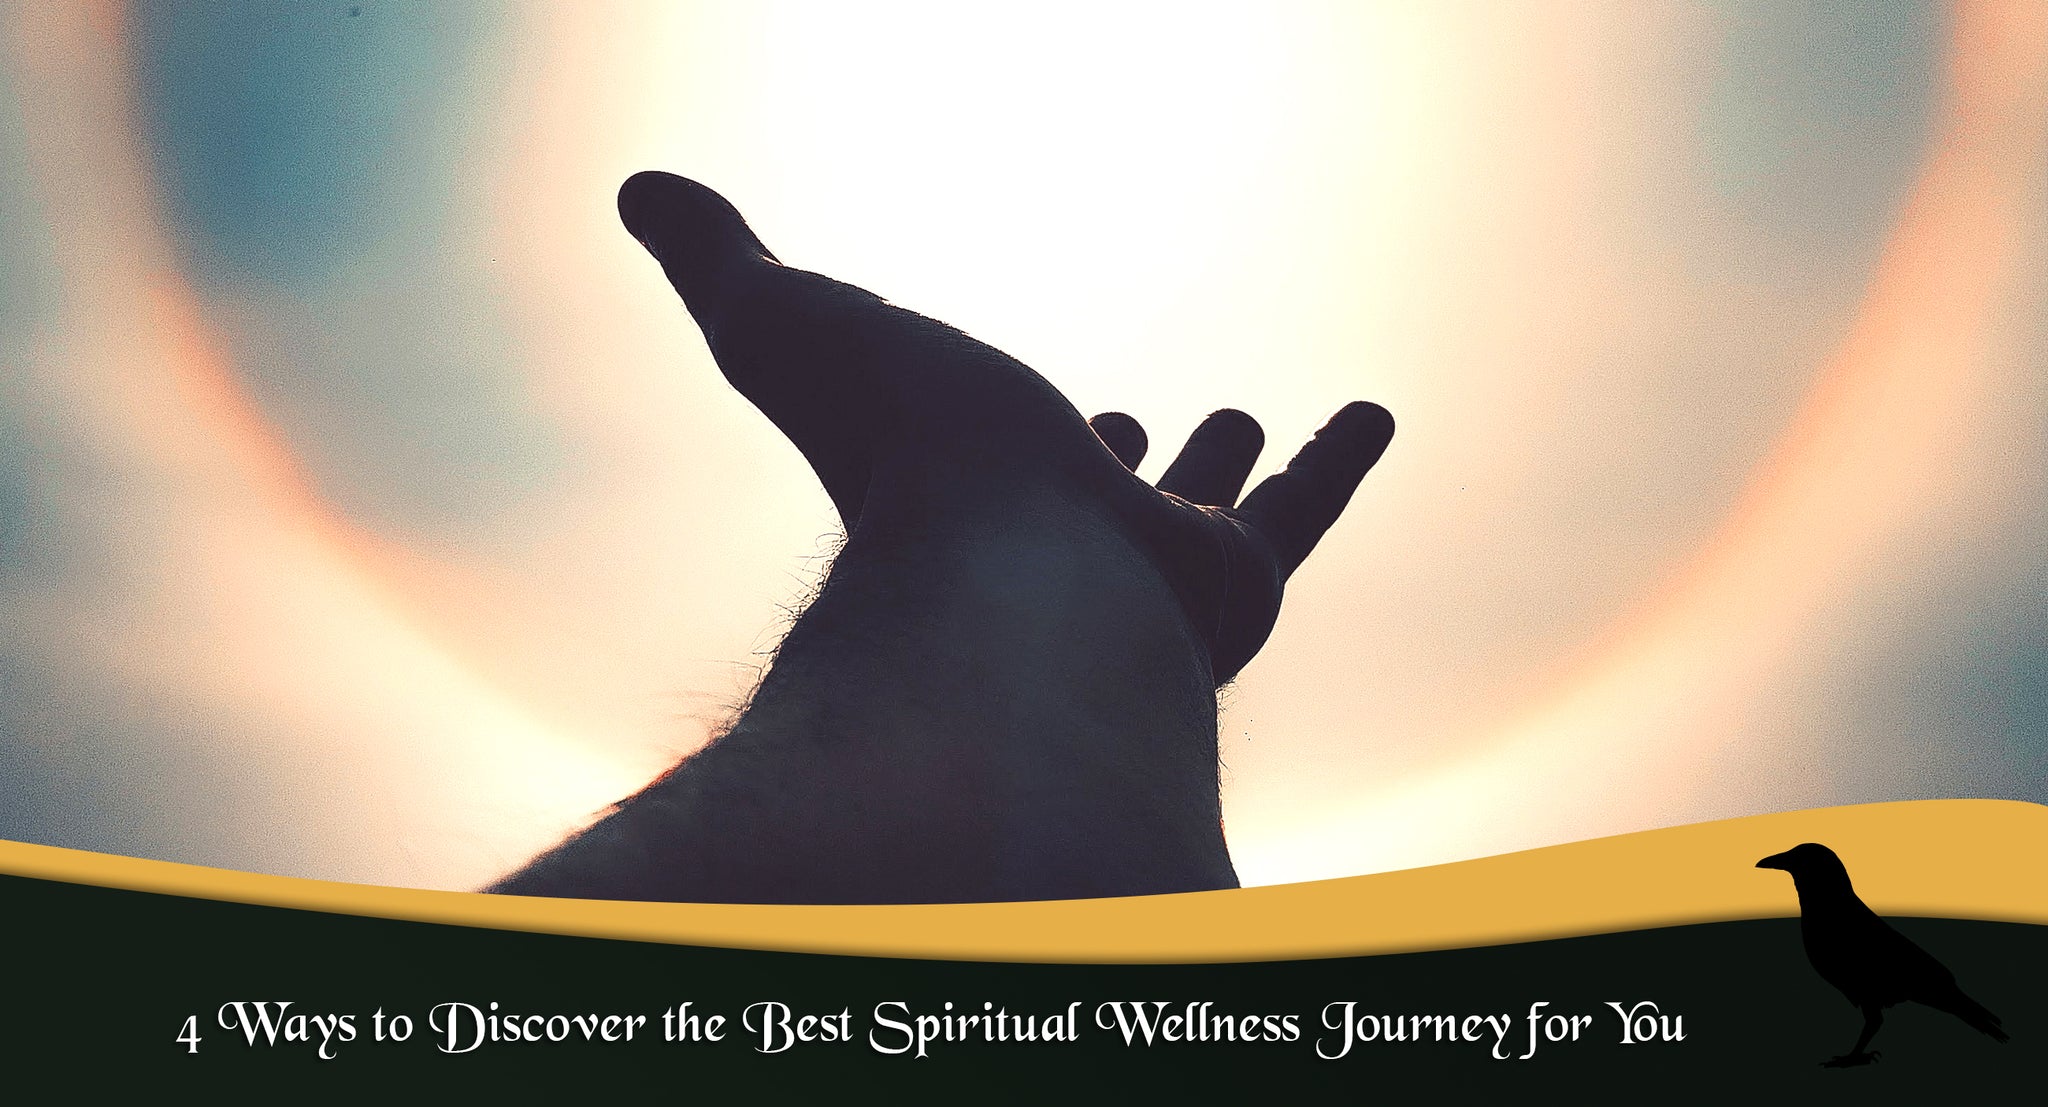 4 Ways to Discover the Best Spiritual Wellness Journey for You